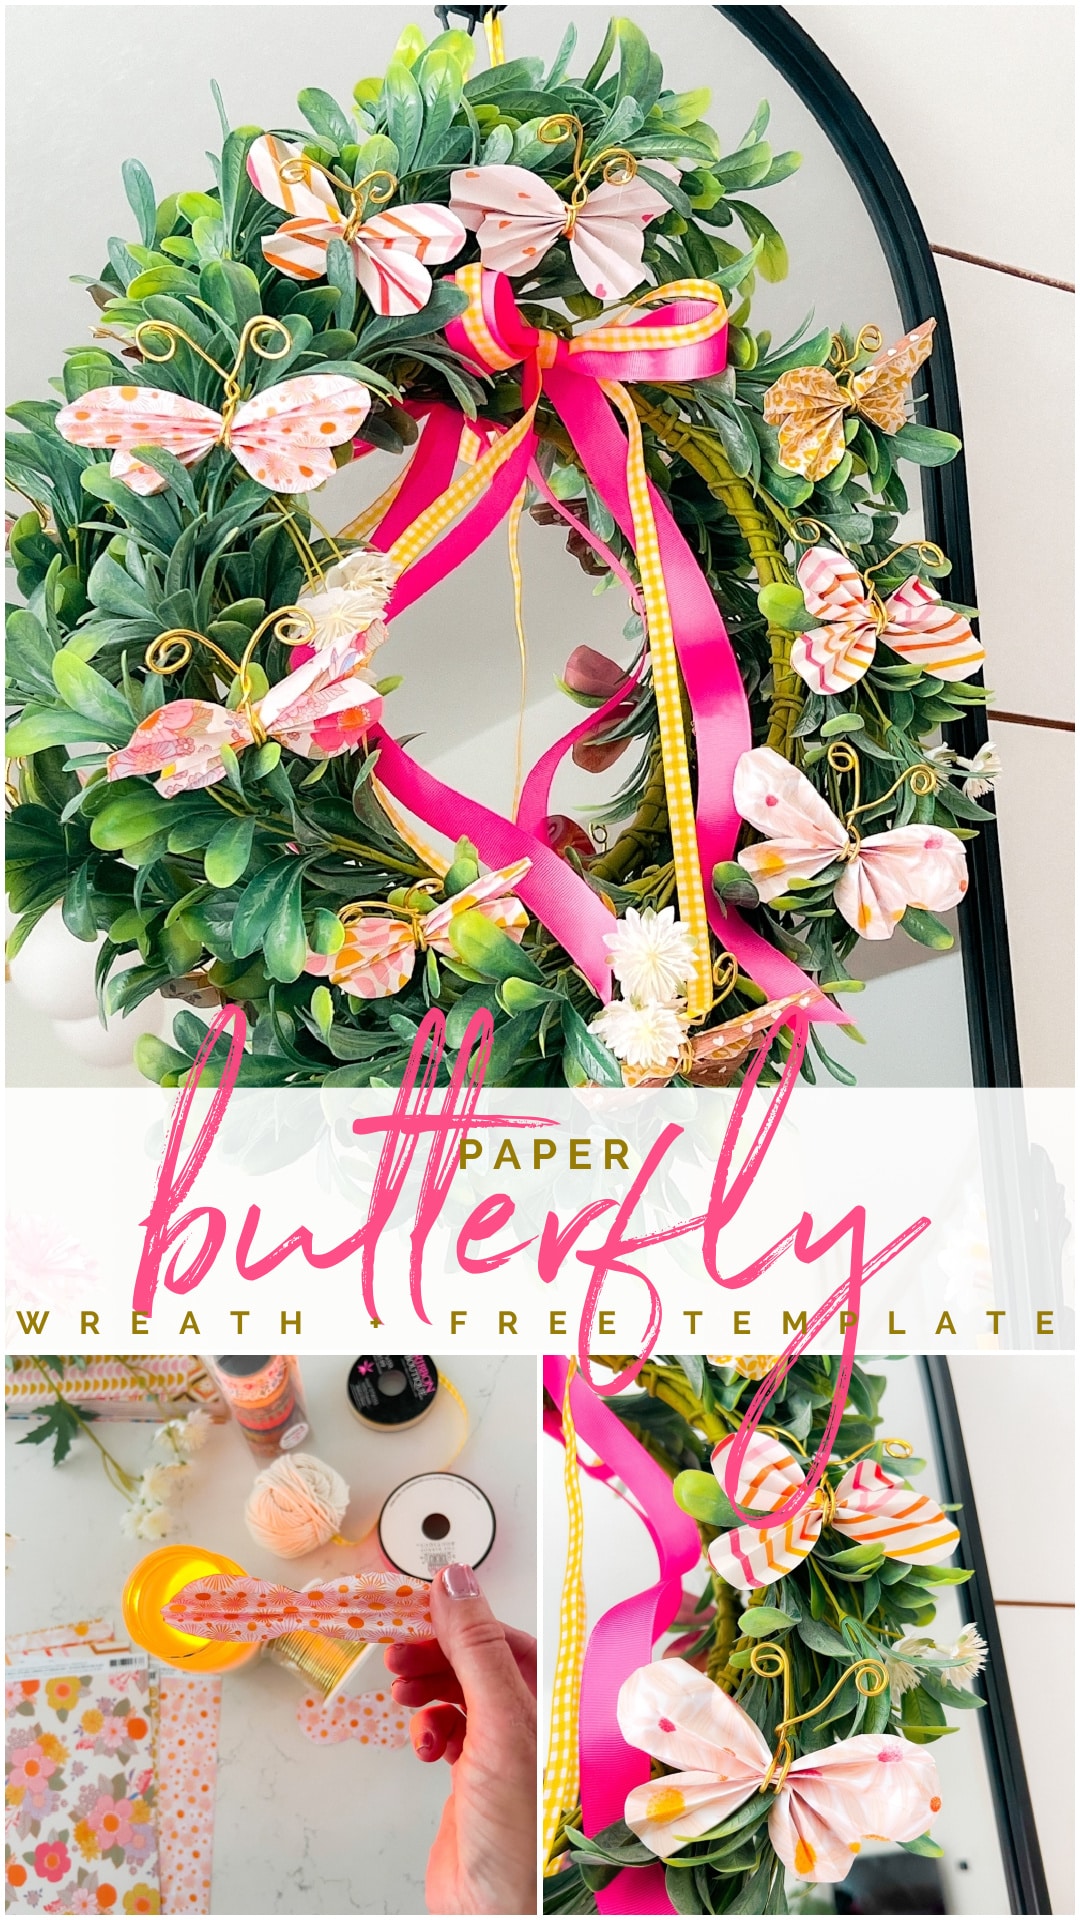 Paper Butterfly Wreath and Free Butterfly Template. Create a vibrant summer wreath adorned with paper butterflies, adding a touch of whimsy and handmade charm to your home decor.